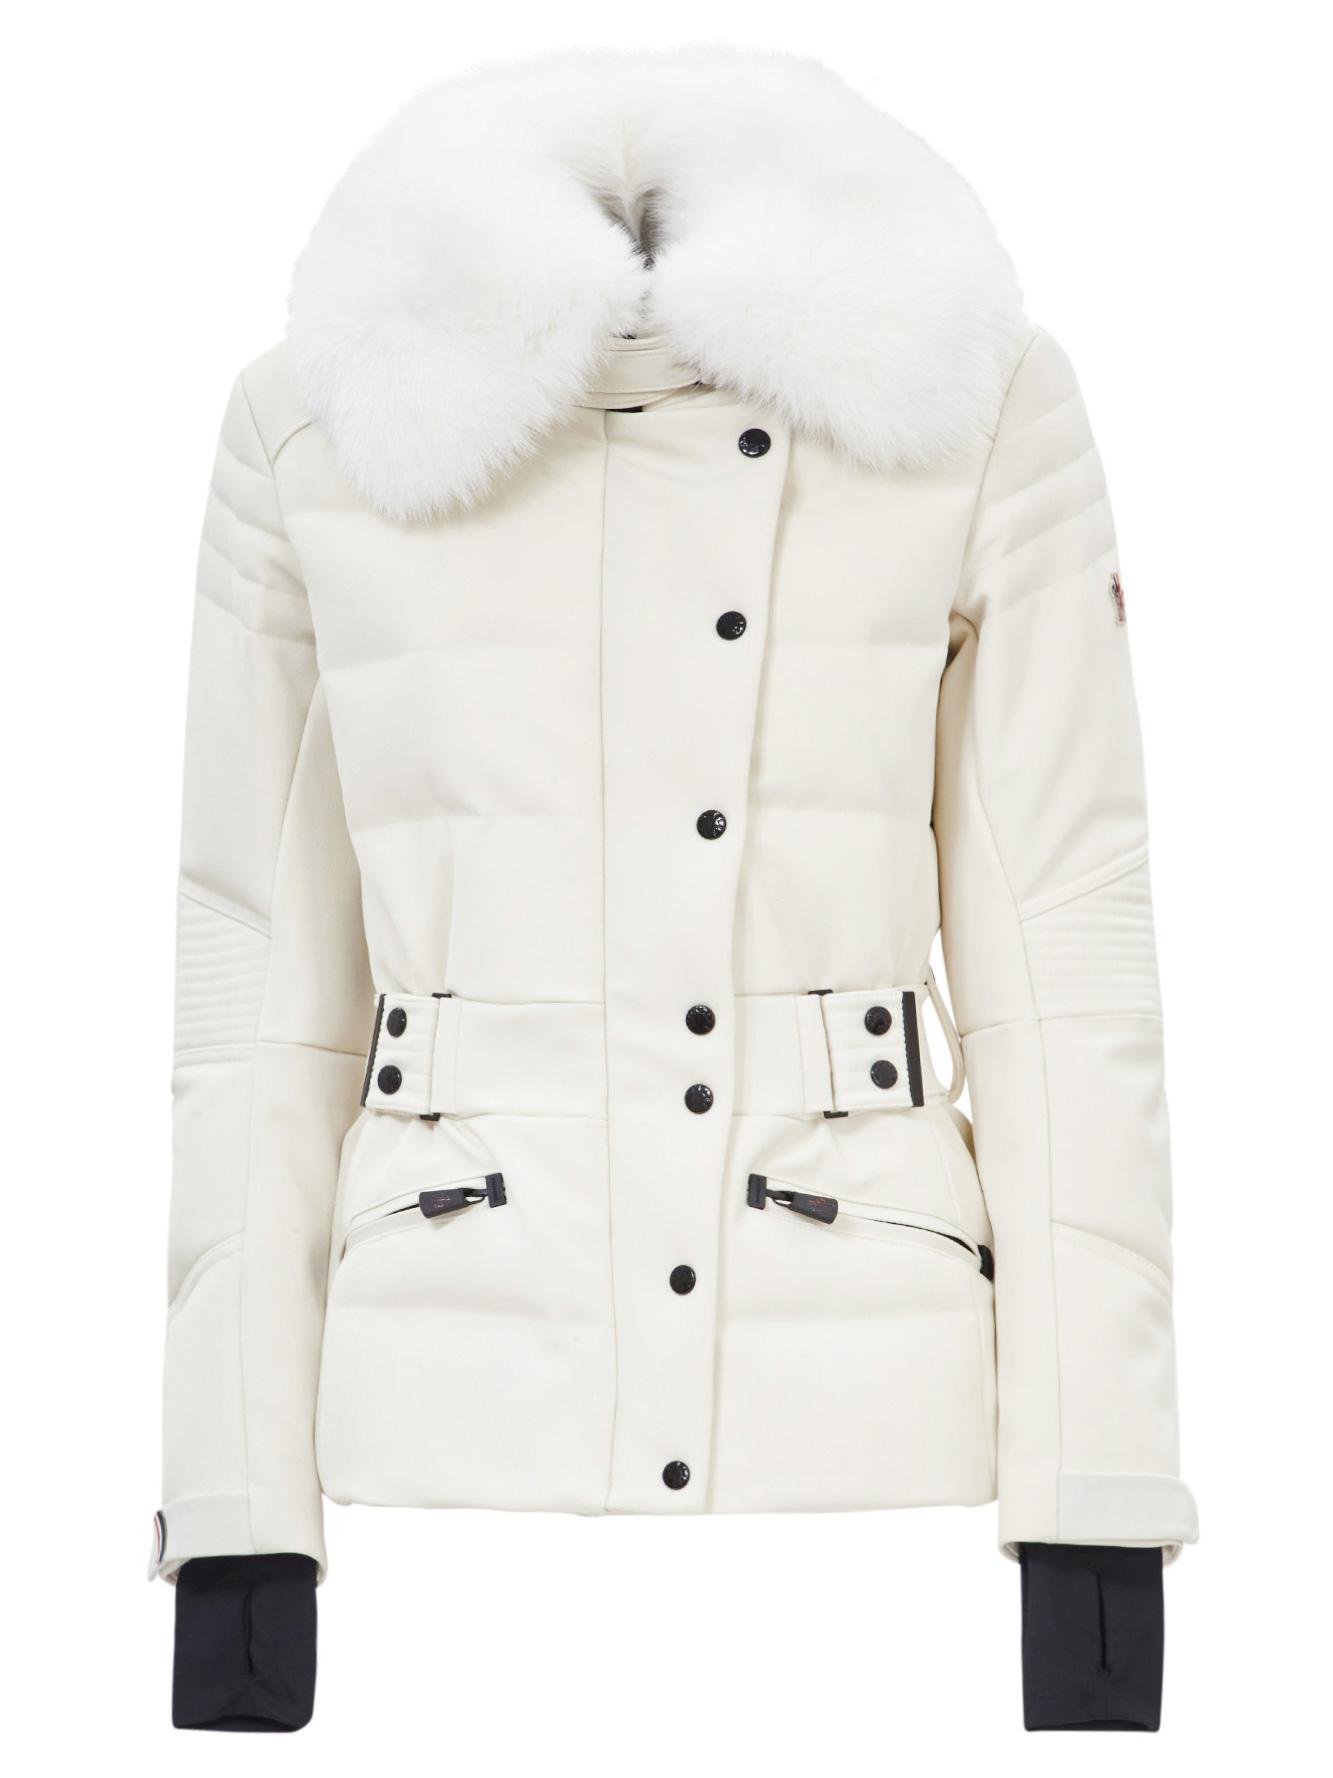 3 MONCLER GRENOBLE Fur Collar Quilted 